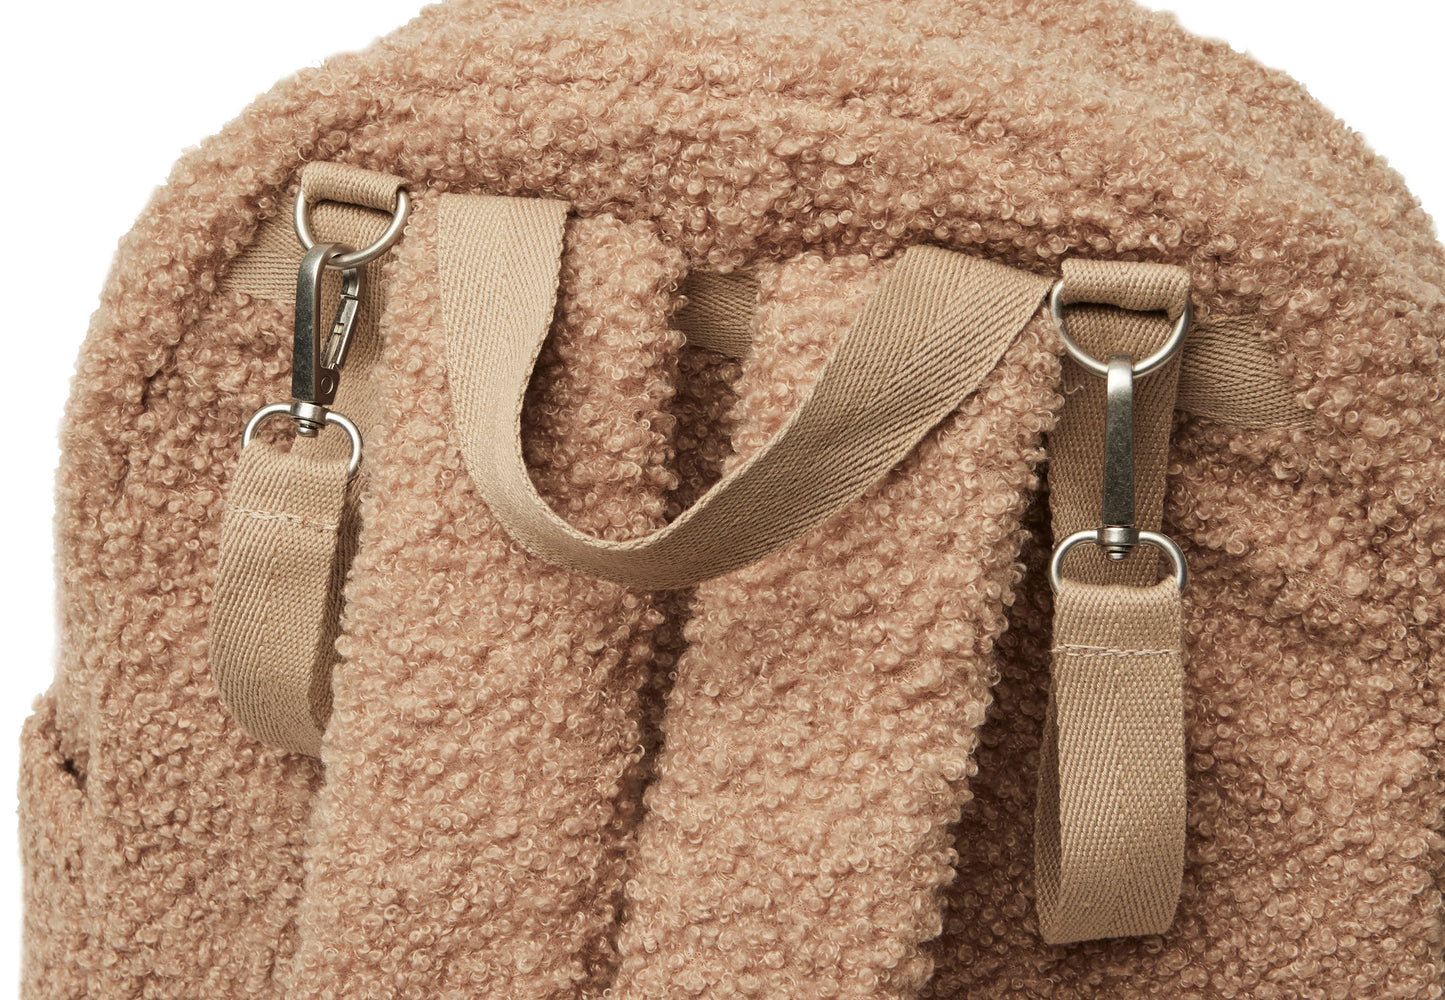 diaper backpack | Boucle Biscuit